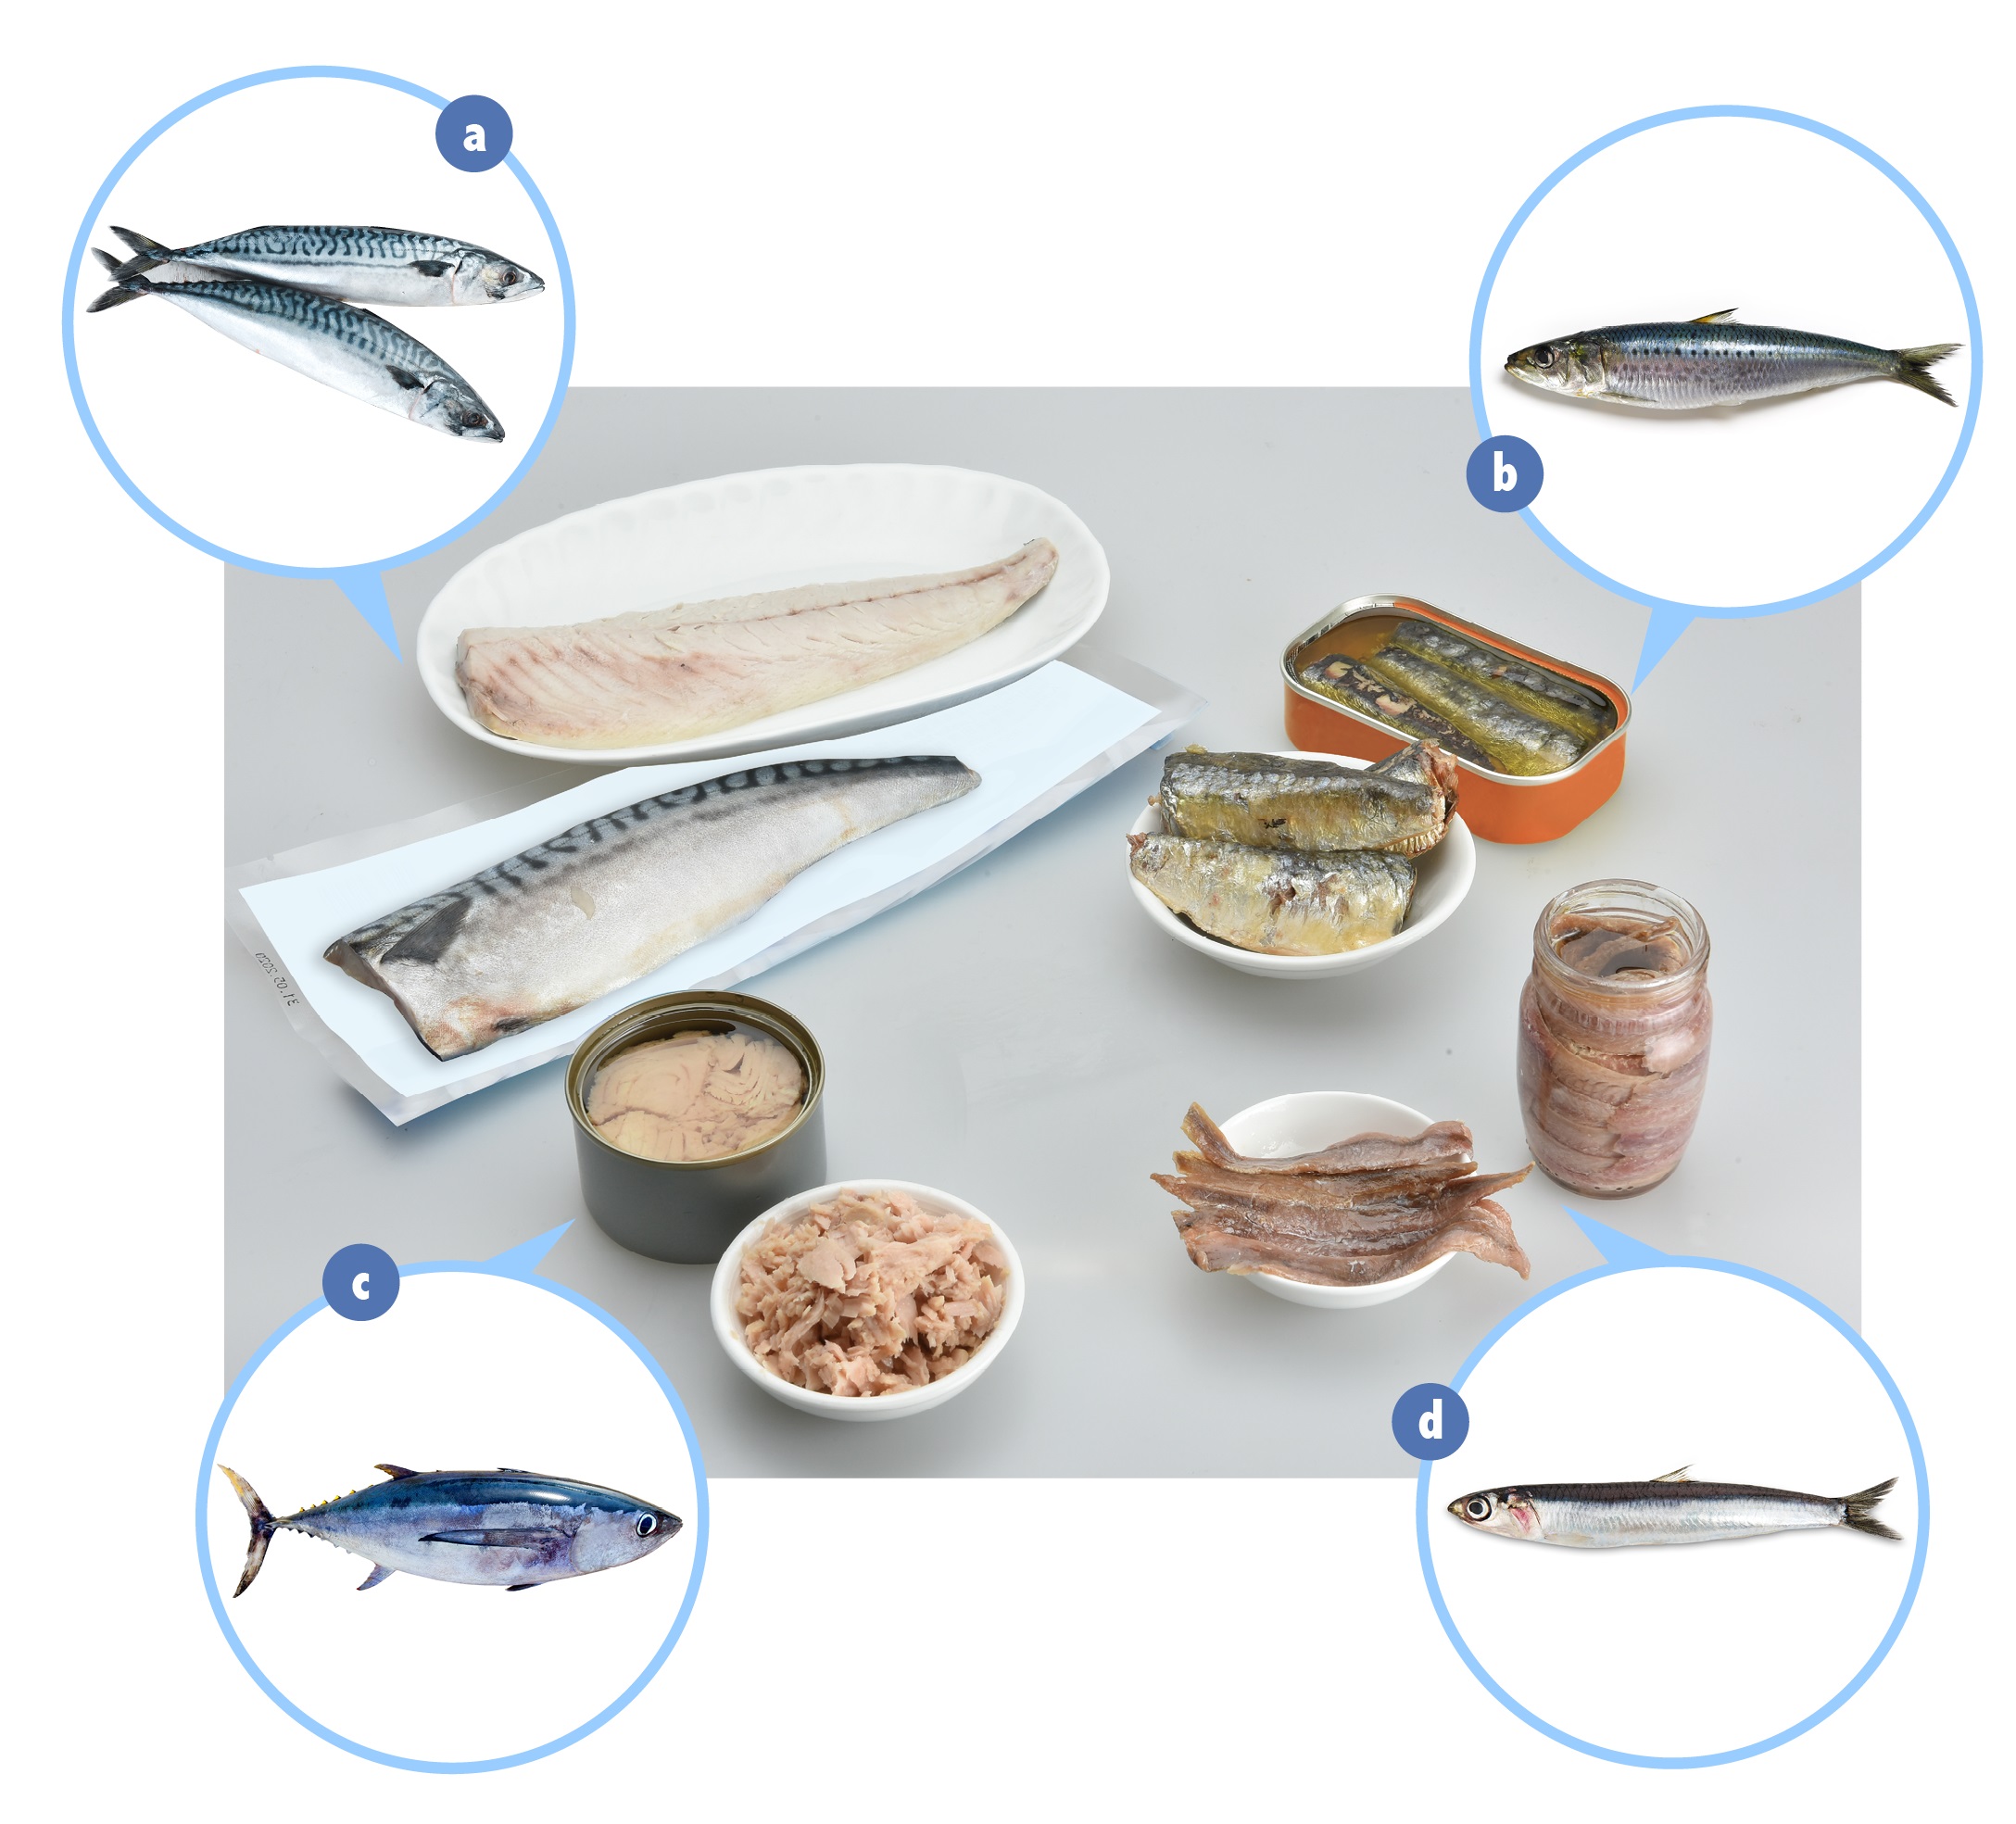 Diagram: Examples of fish with an elevated level of naturally occurring histidine: (a) mackerel, (b) sardine, (c) tuna and (d) anchovy. Some of their respective products have also been found to contain a high level of histamine.